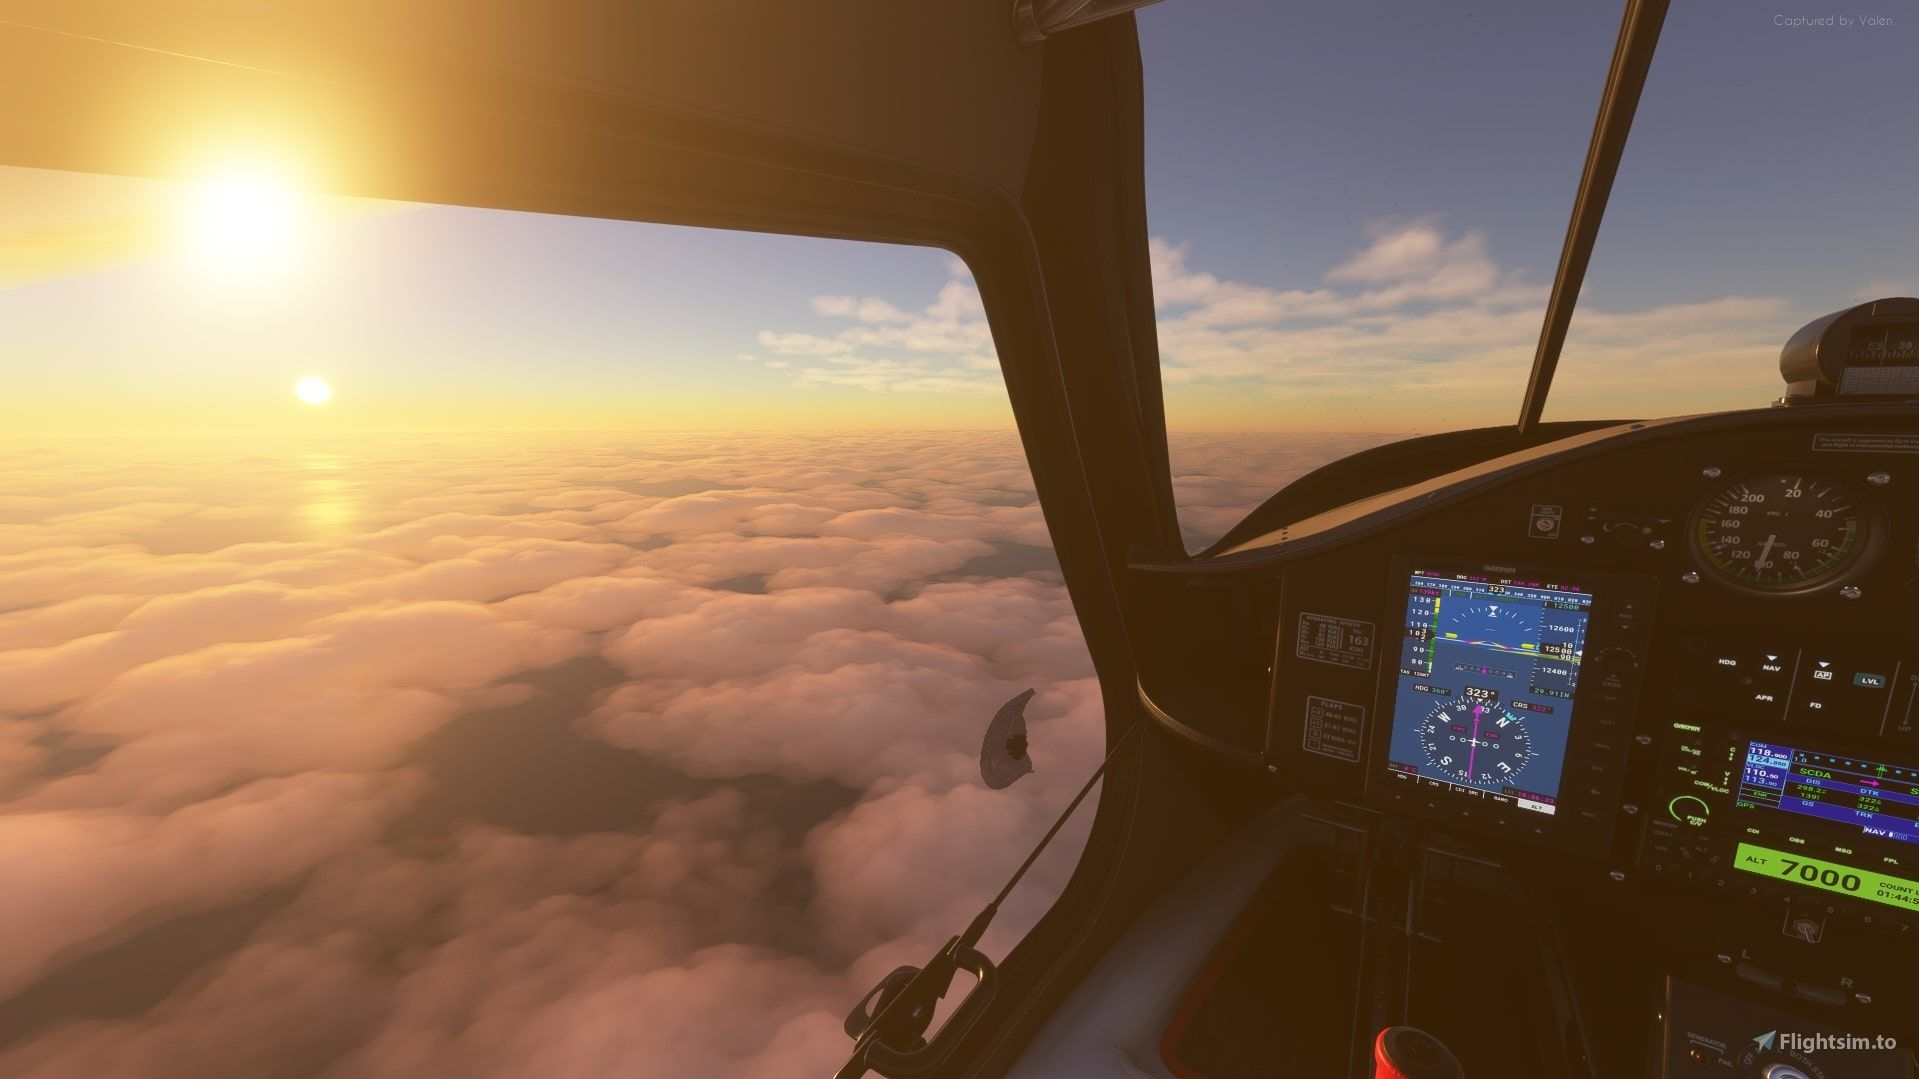 Big scary chasm opens up in Microsoft Flight Simulator reboot